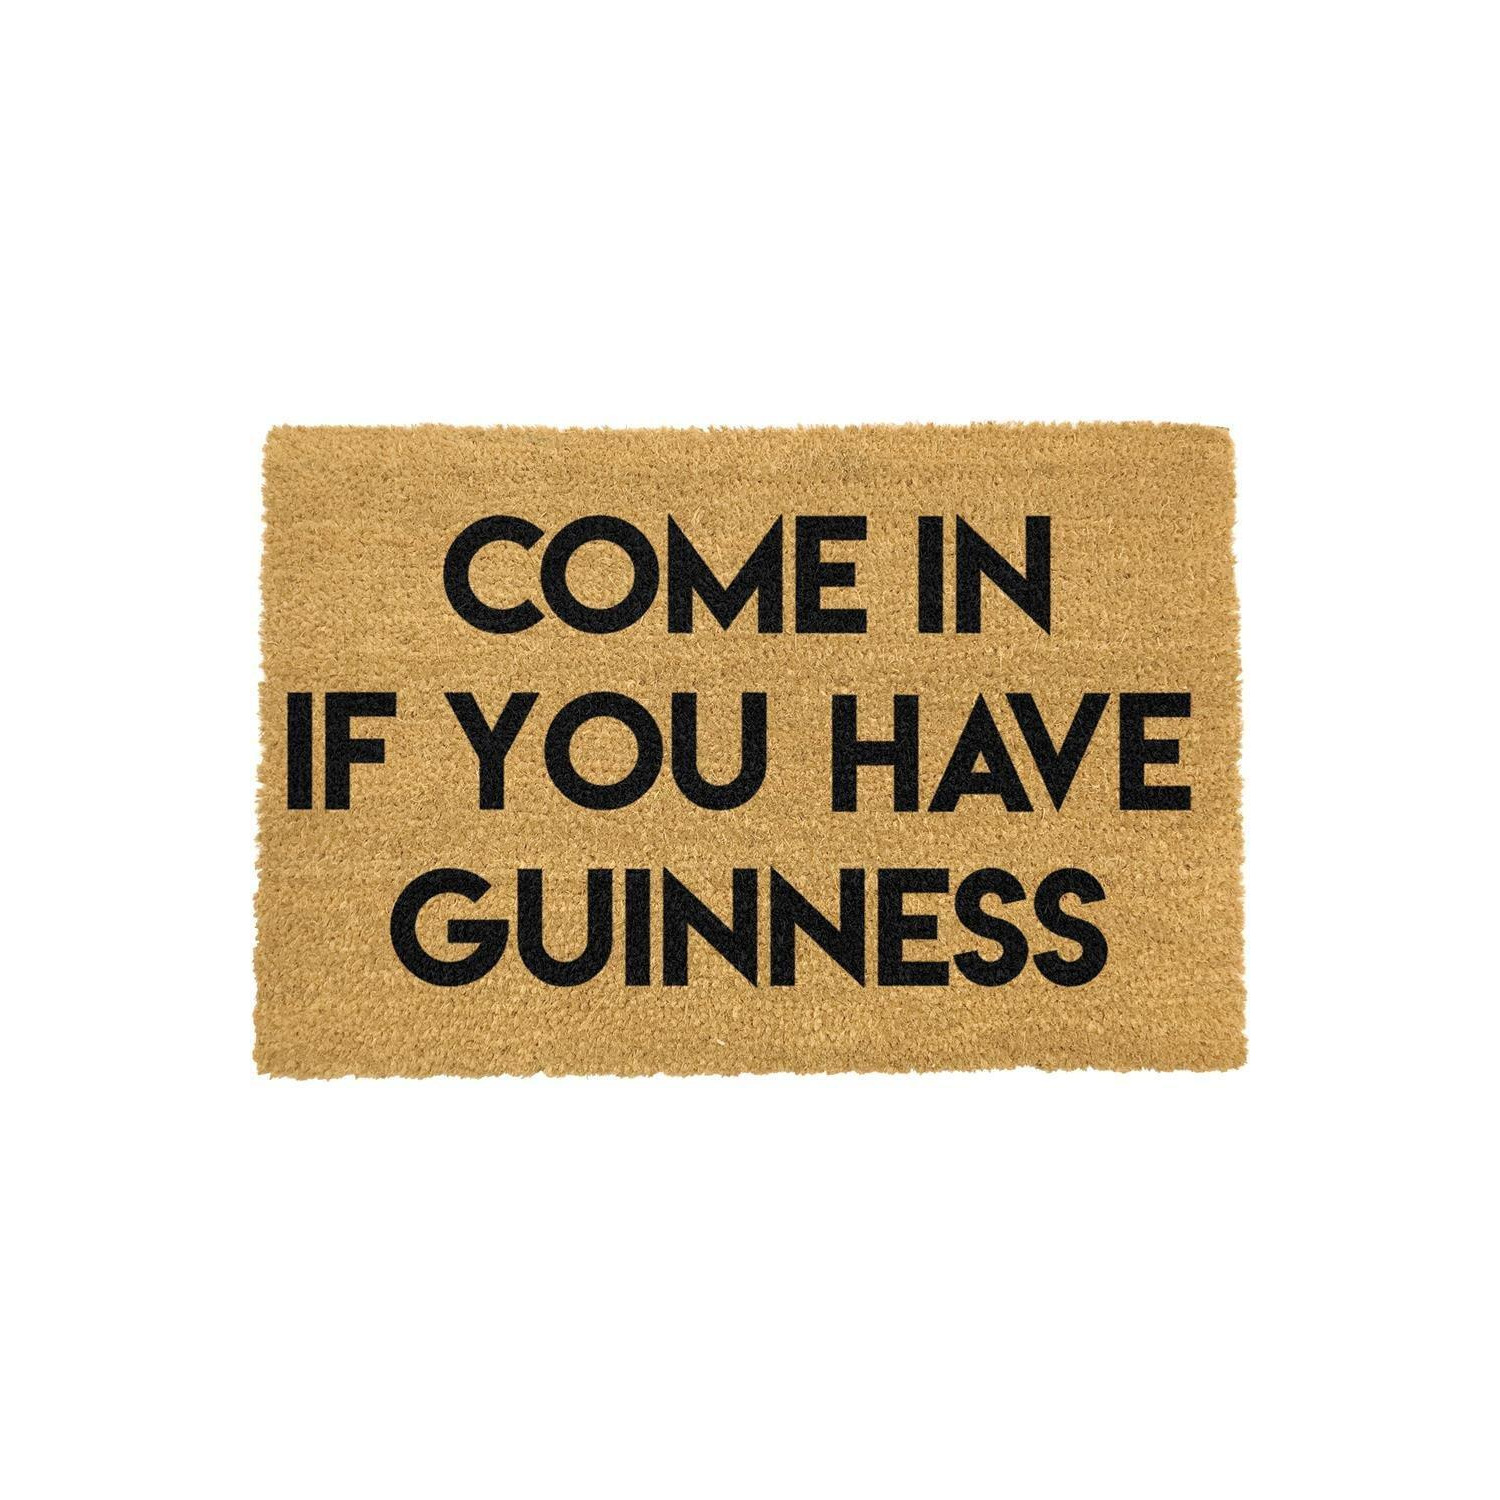 Come in if You Have Guinness Doormat - image 1